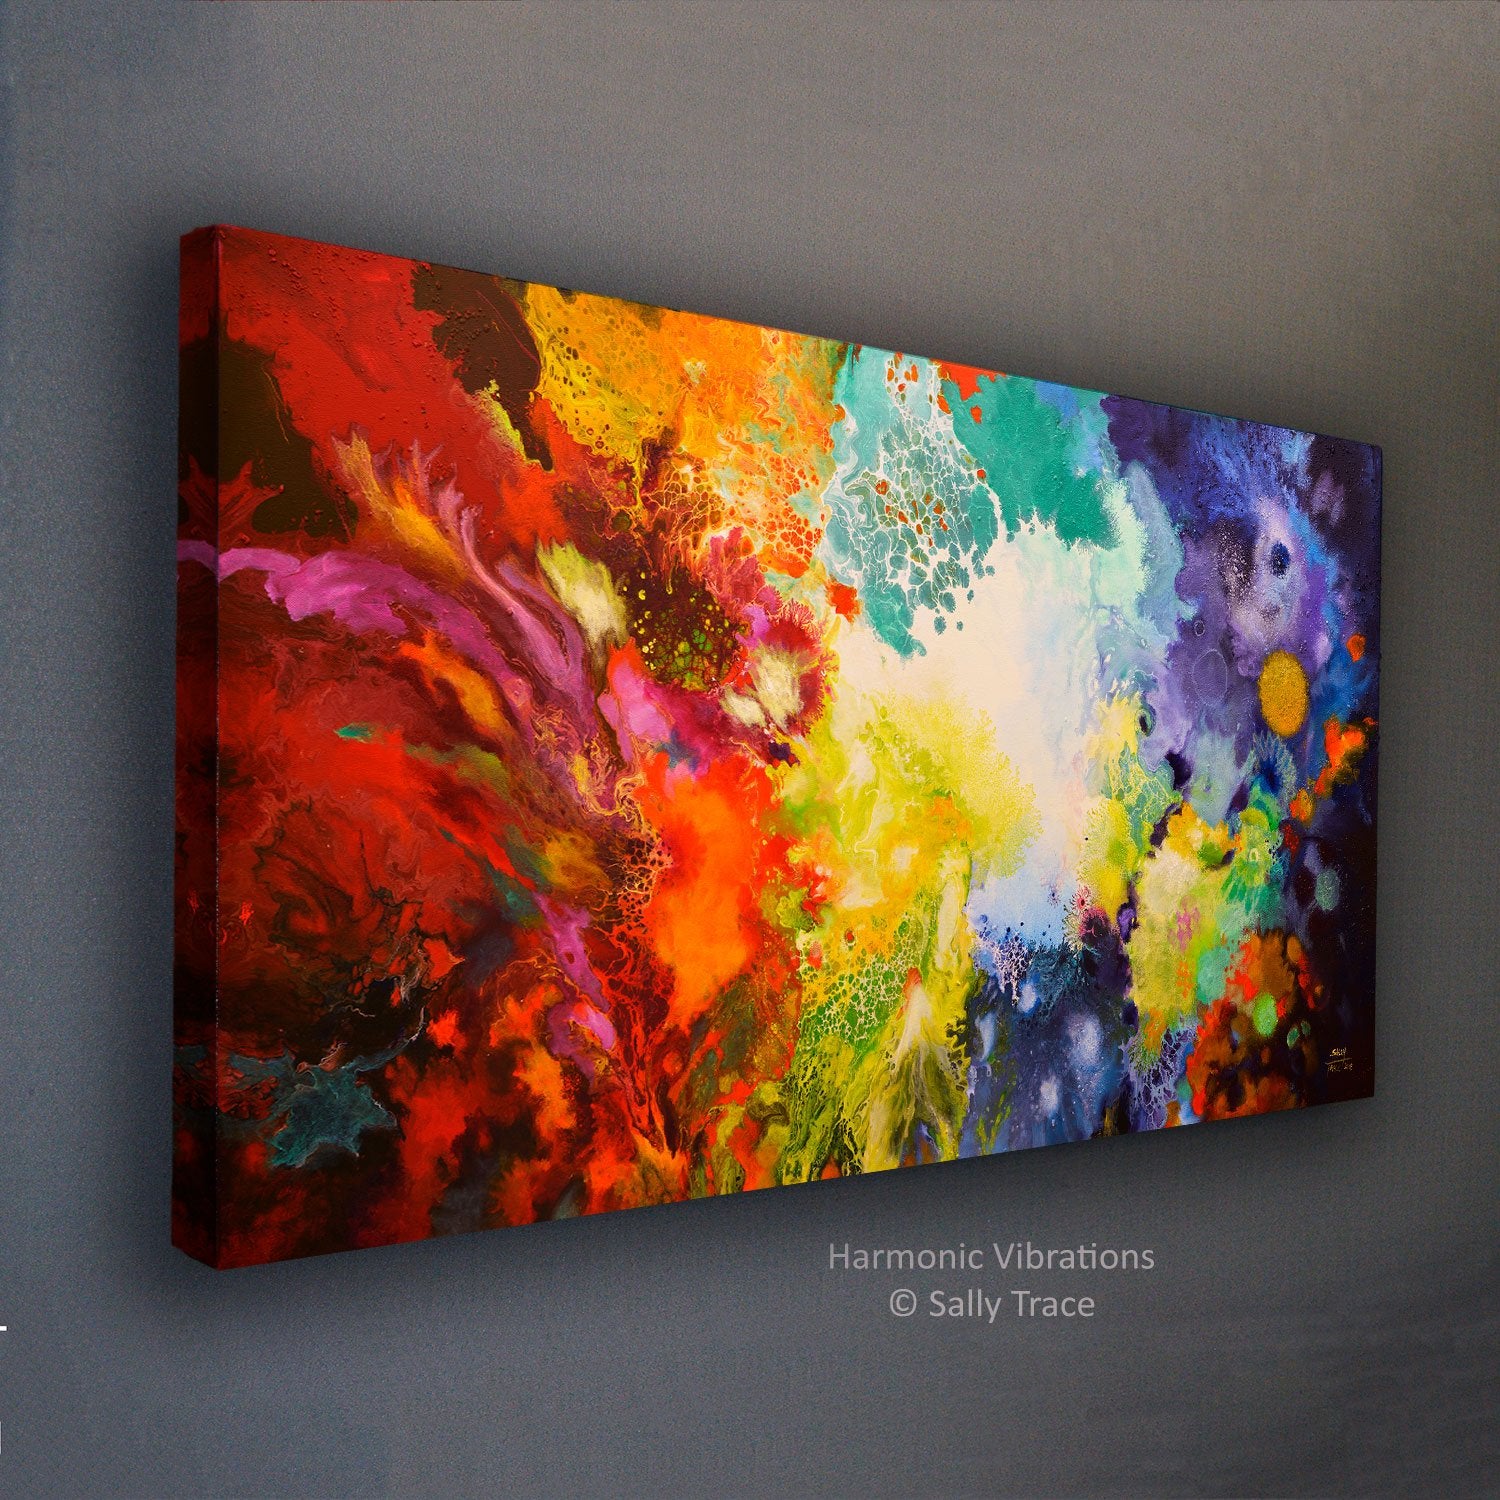 Harmonic Vibrations, fluid art giclee print for sale made from the original acrylic pour painting, side-view